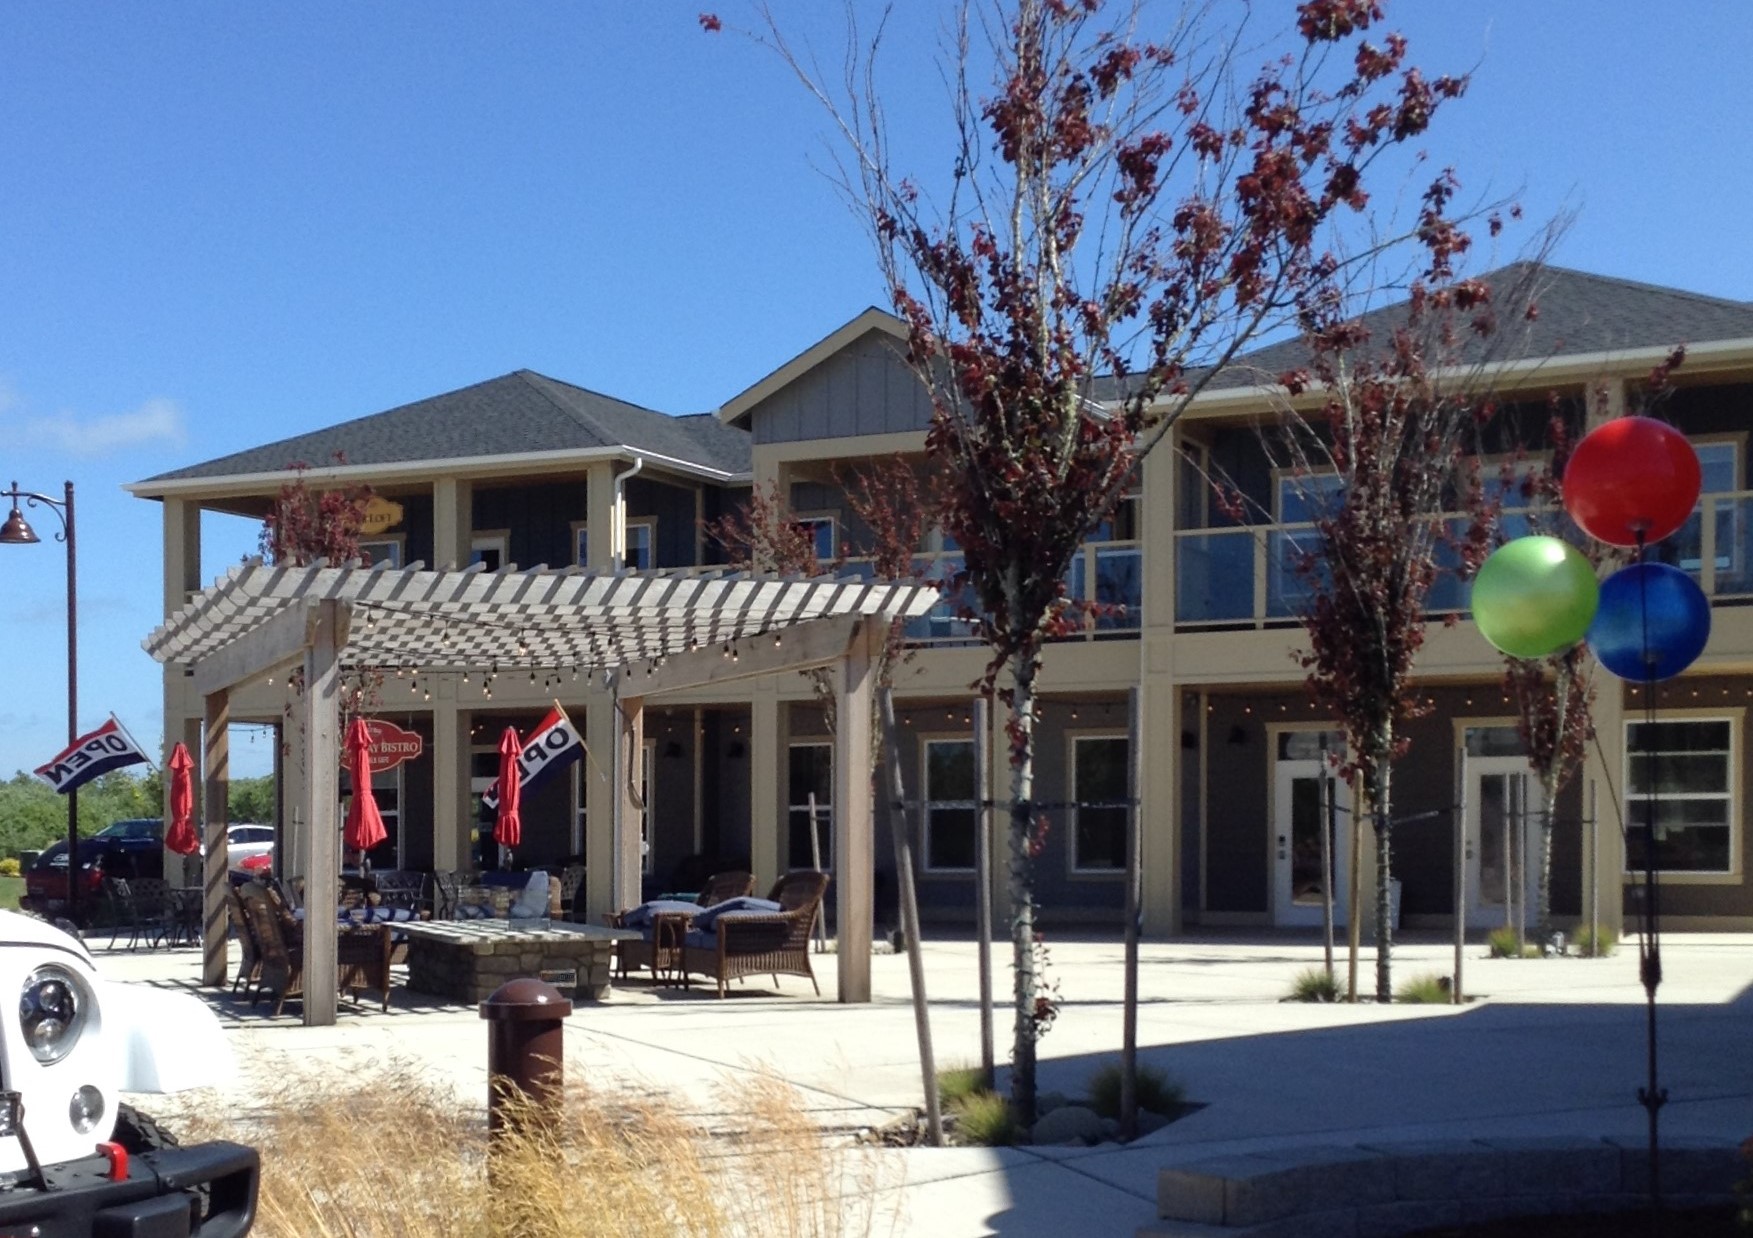 Oyhut Bay Village Bistro south of the Town of Ocean Shores #graysharborbeaches